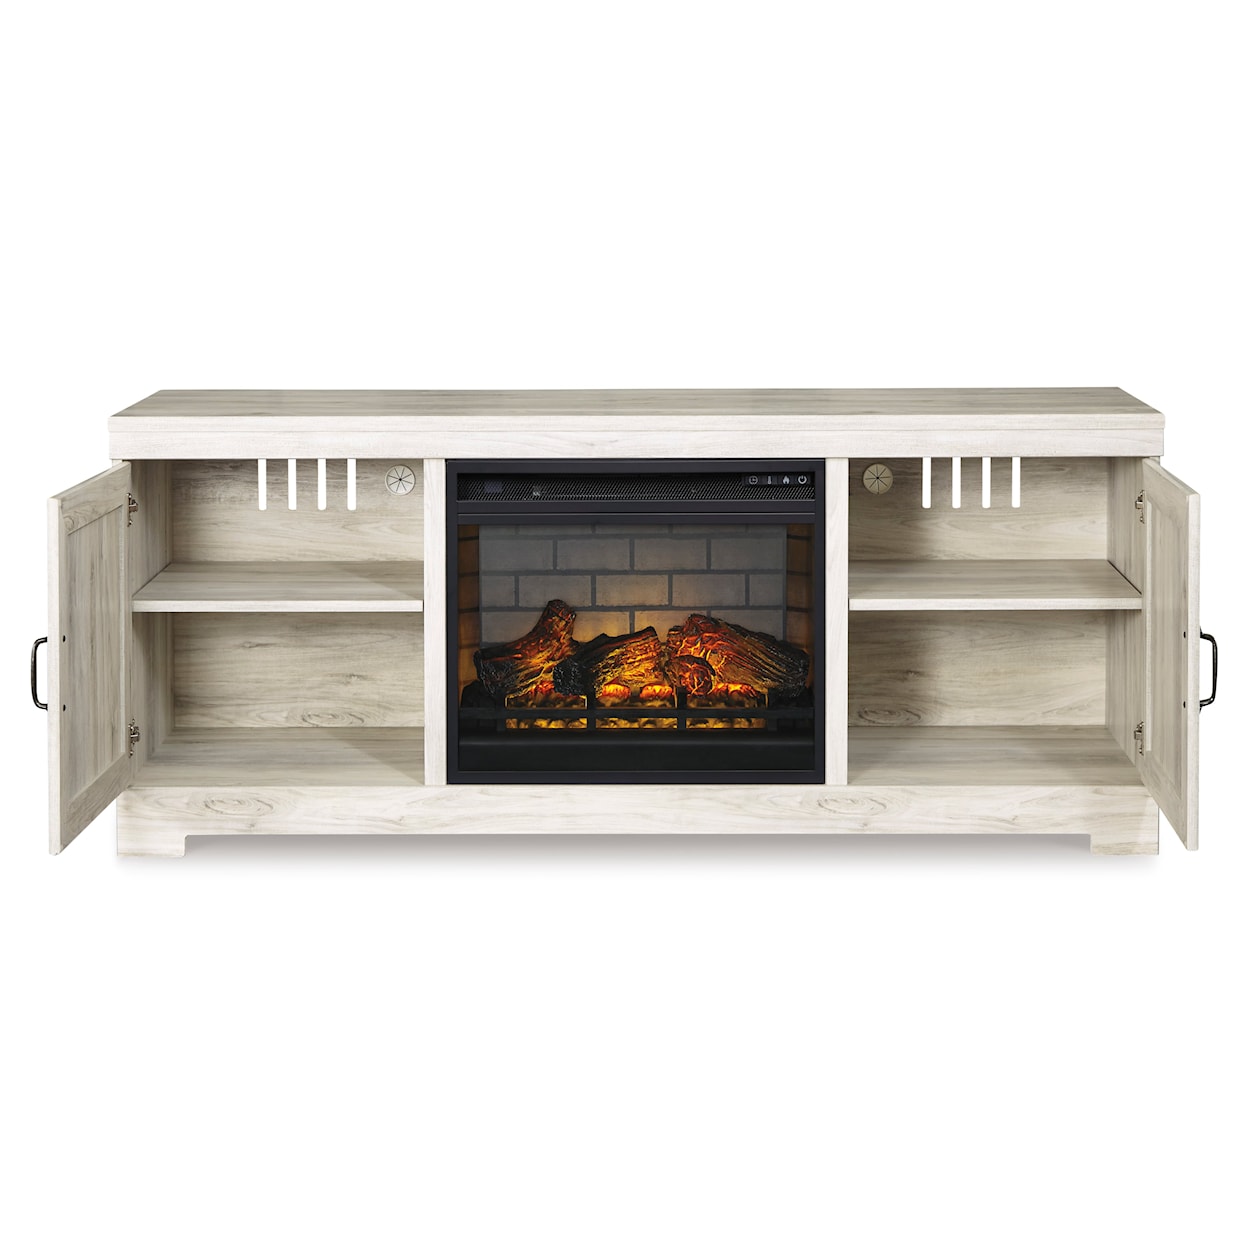 StyleLine Bellaby Large TV Stand with Fireplace